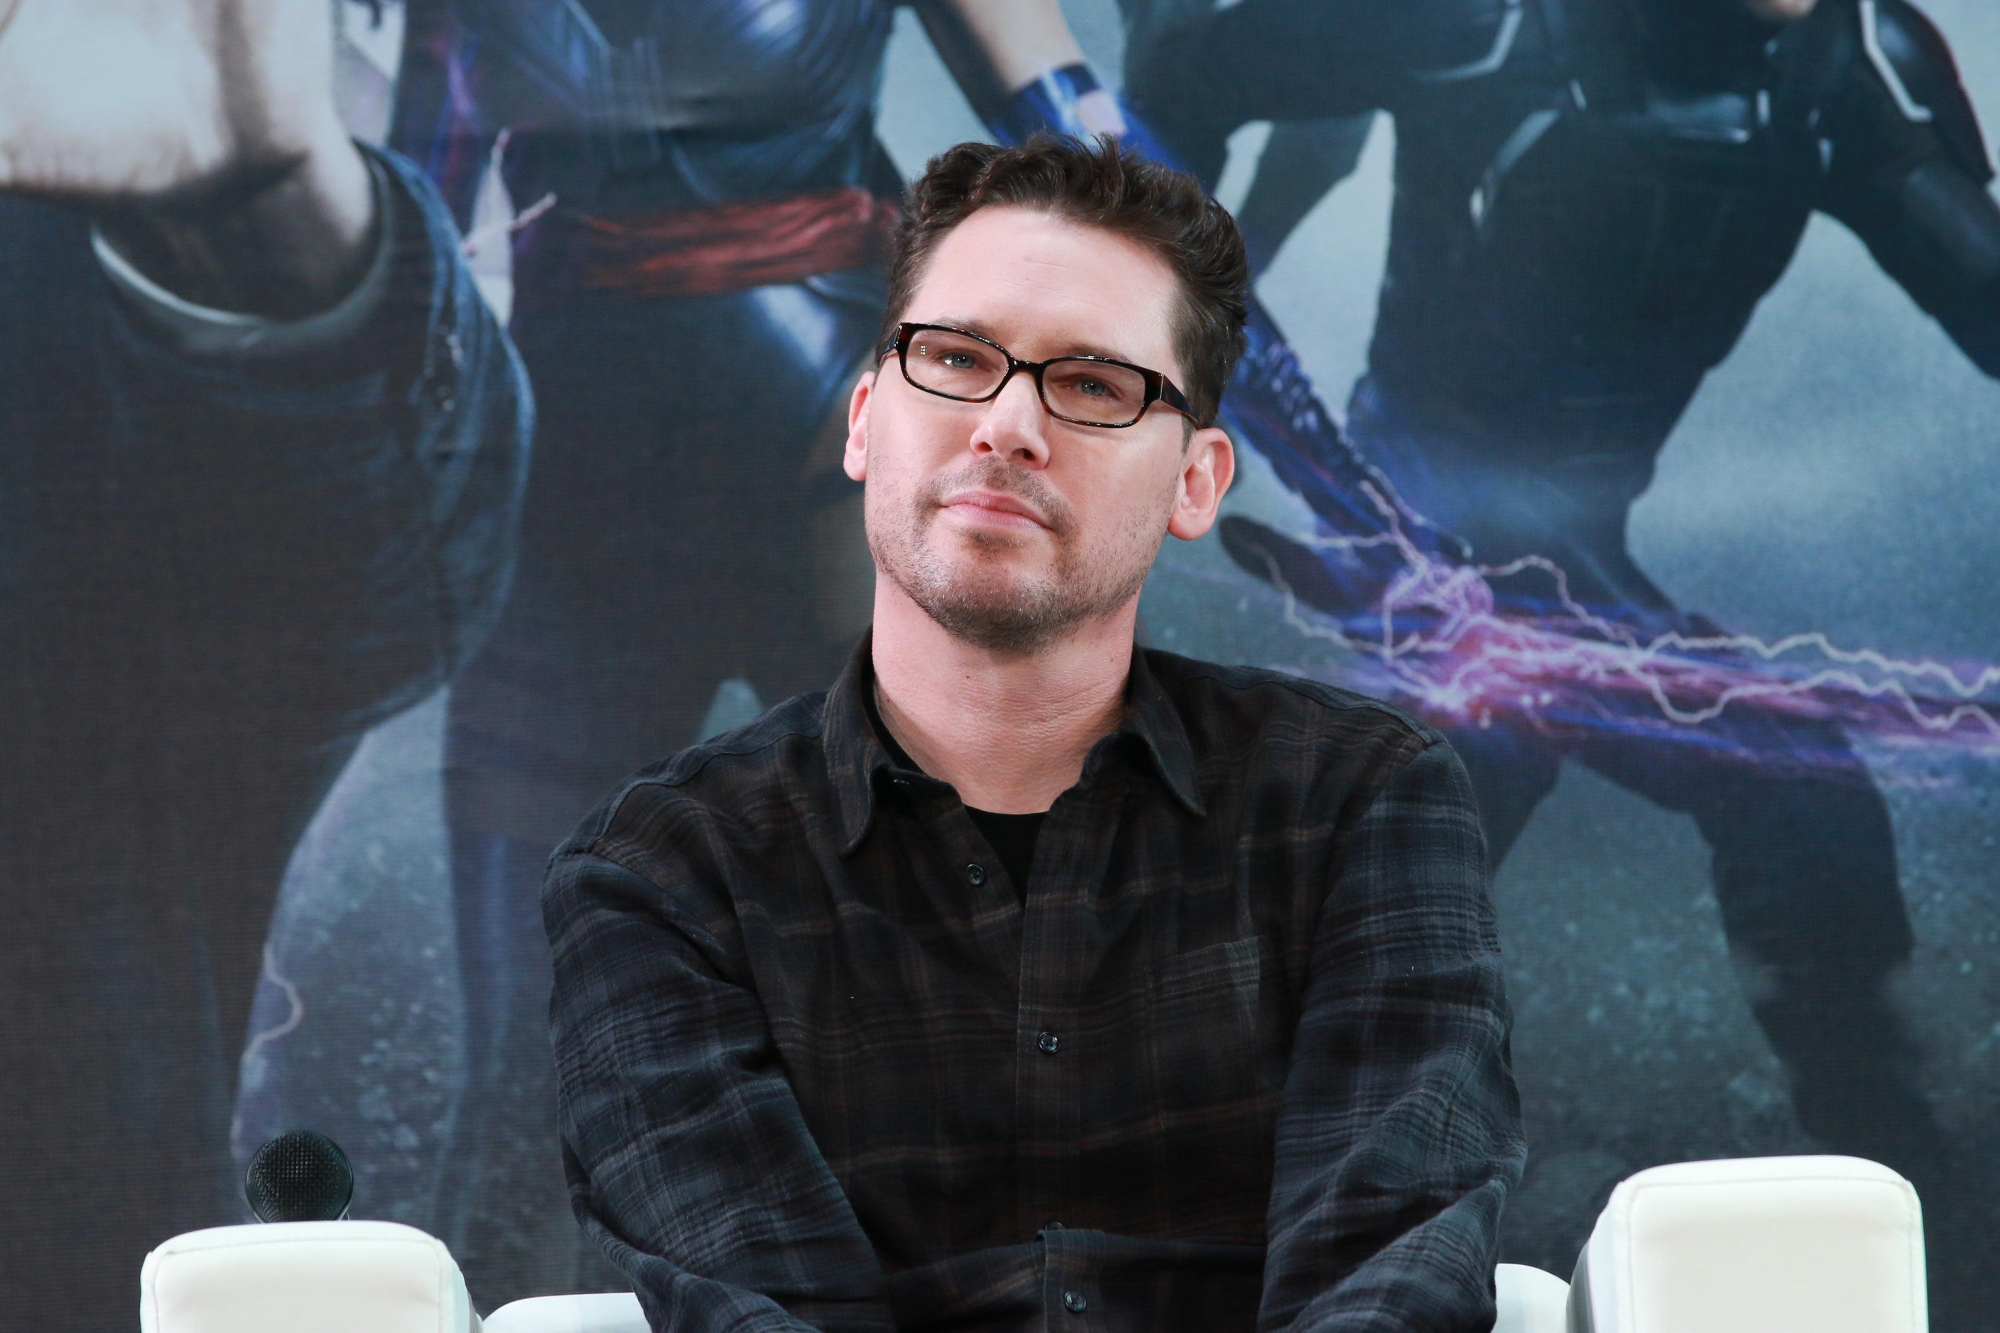 Bryan Singer in article about abuse wearing glasses in front of an 'X-Men' poster